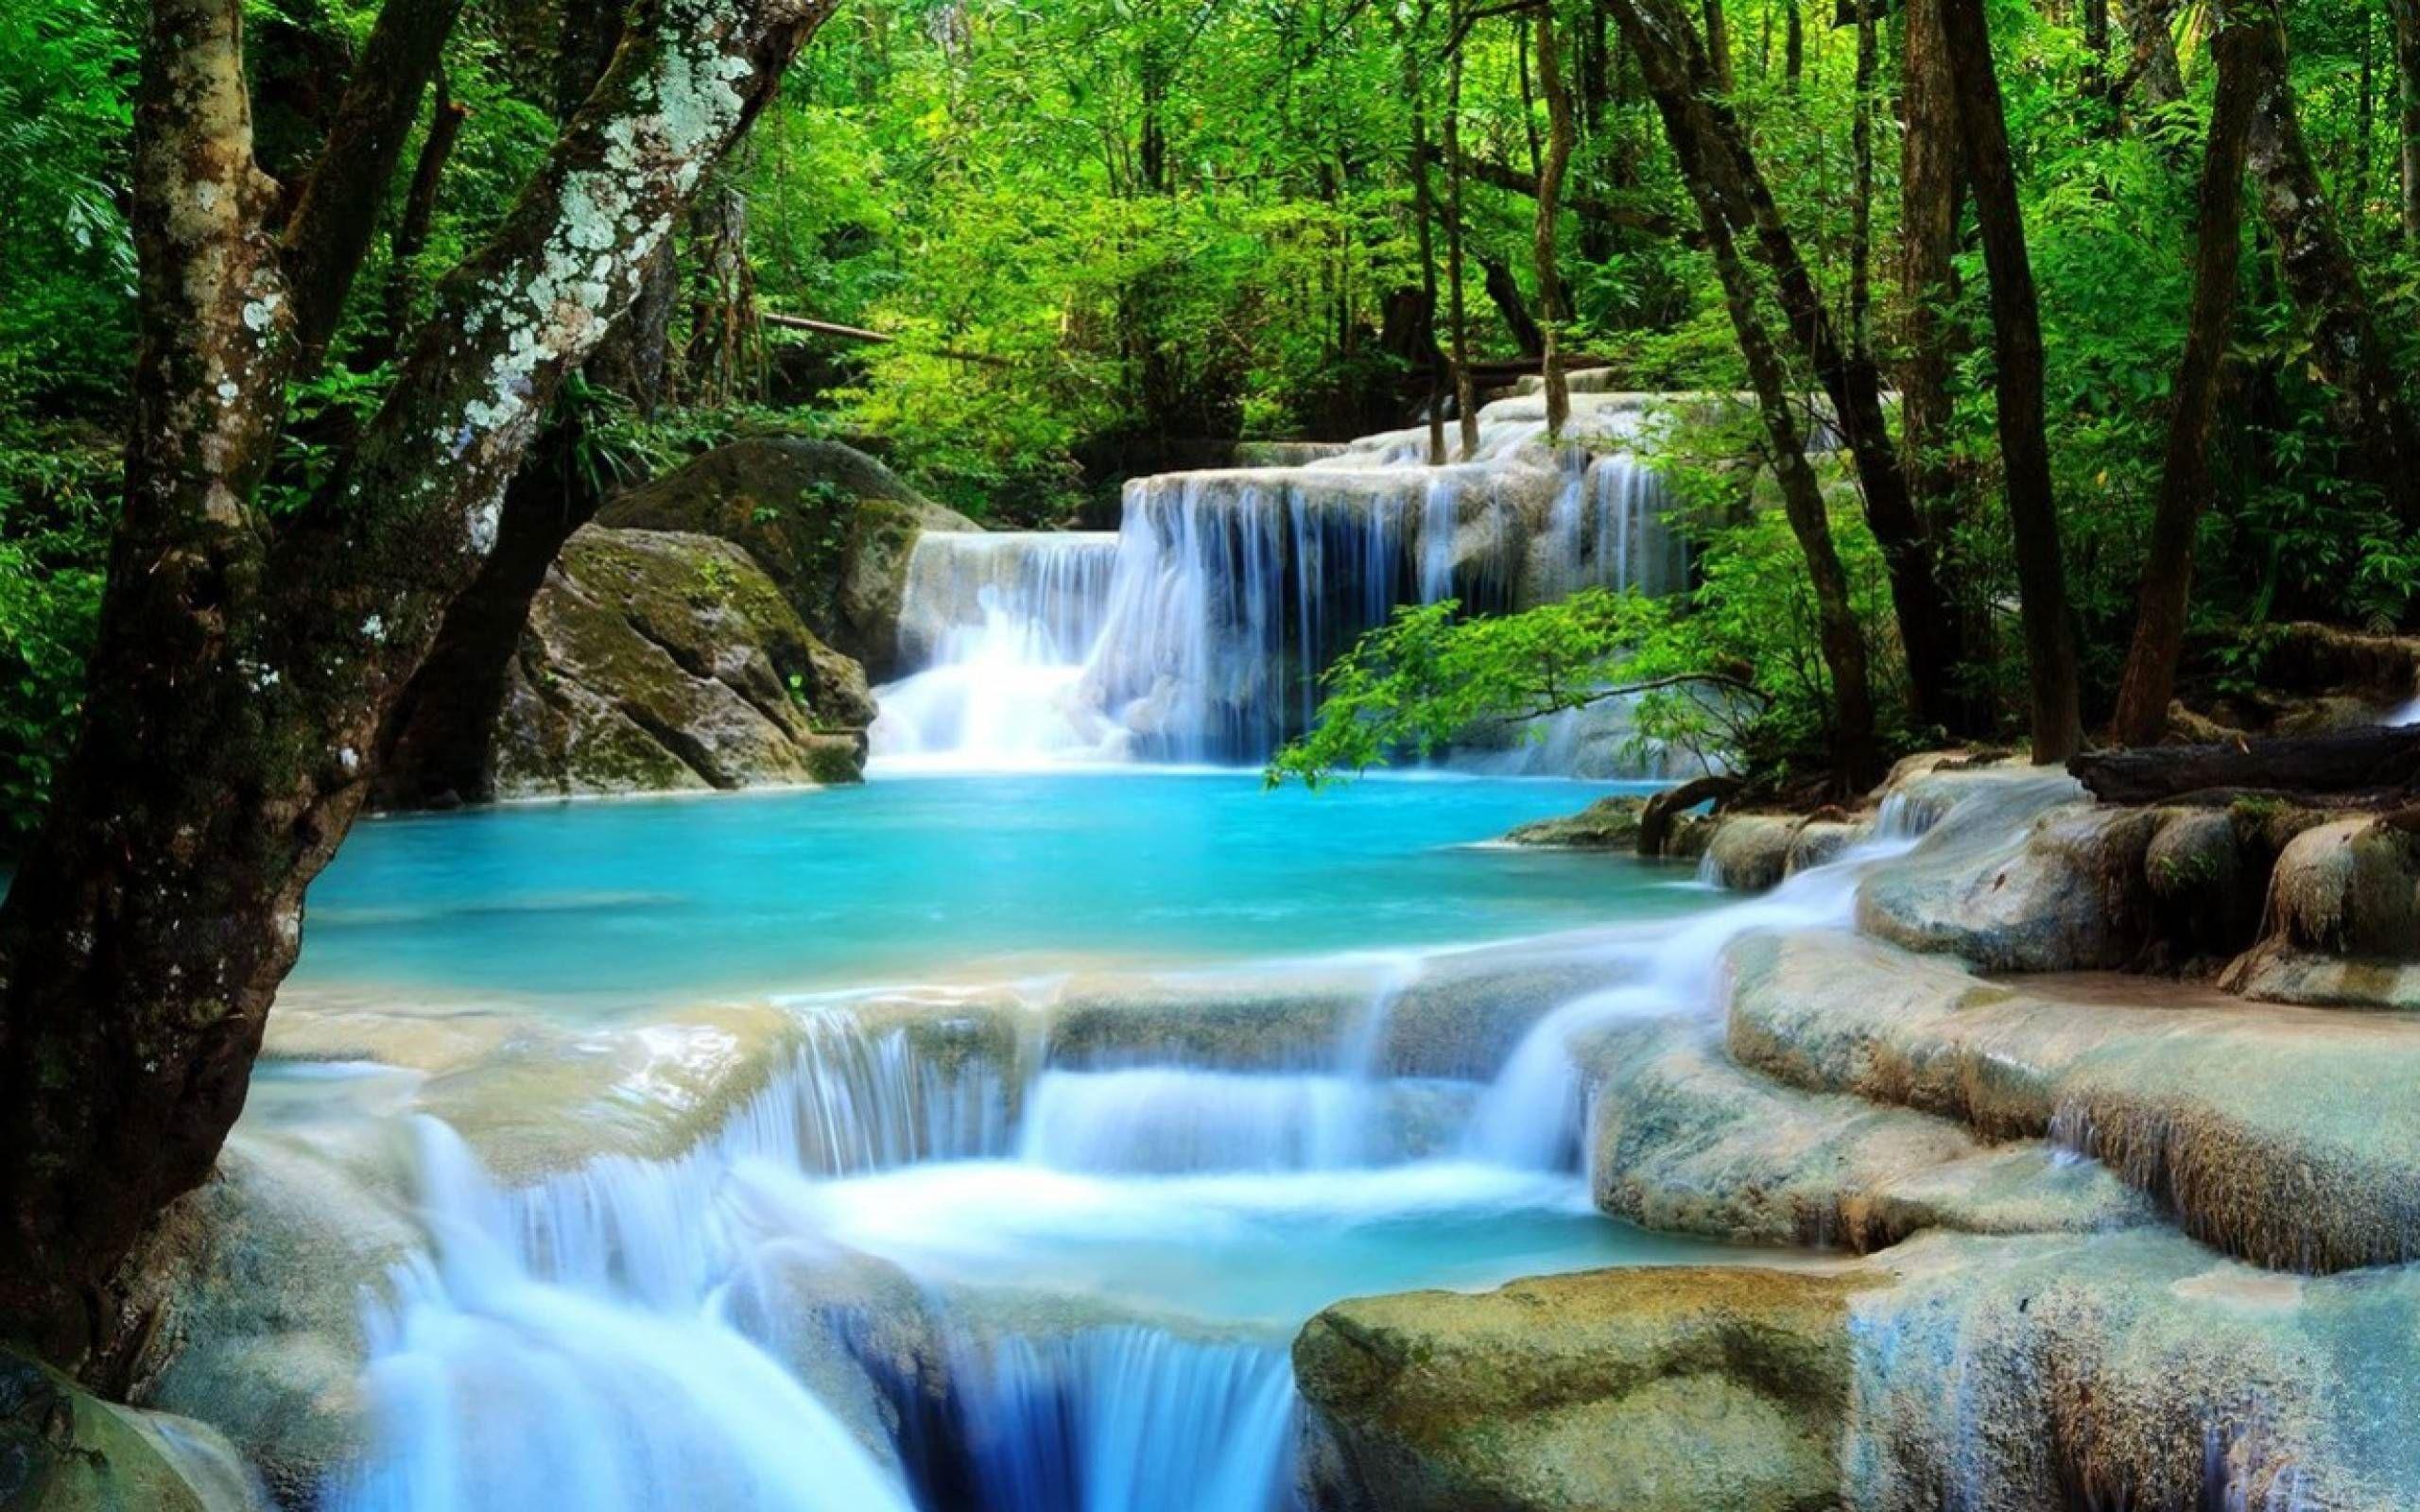 Waterfall Image For Desktop Wallpapers 2560 x 1600 px 1.2 MB